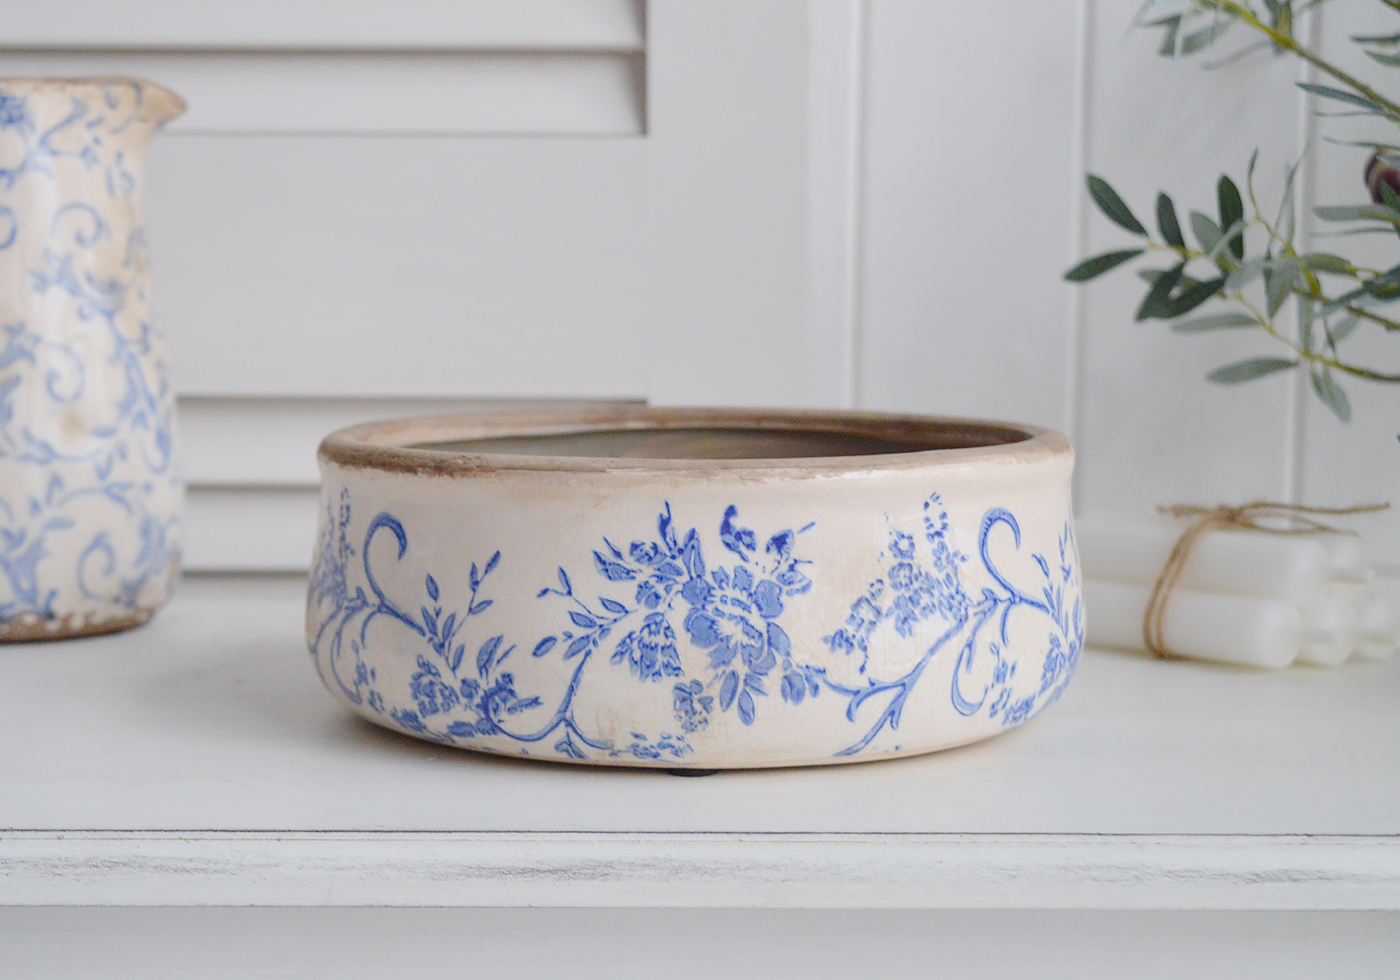 Prospect vintage ceramic low pots. Blue and white home decor for New England Style interiors for coastal, country and city home interiors from The White Lighthouse